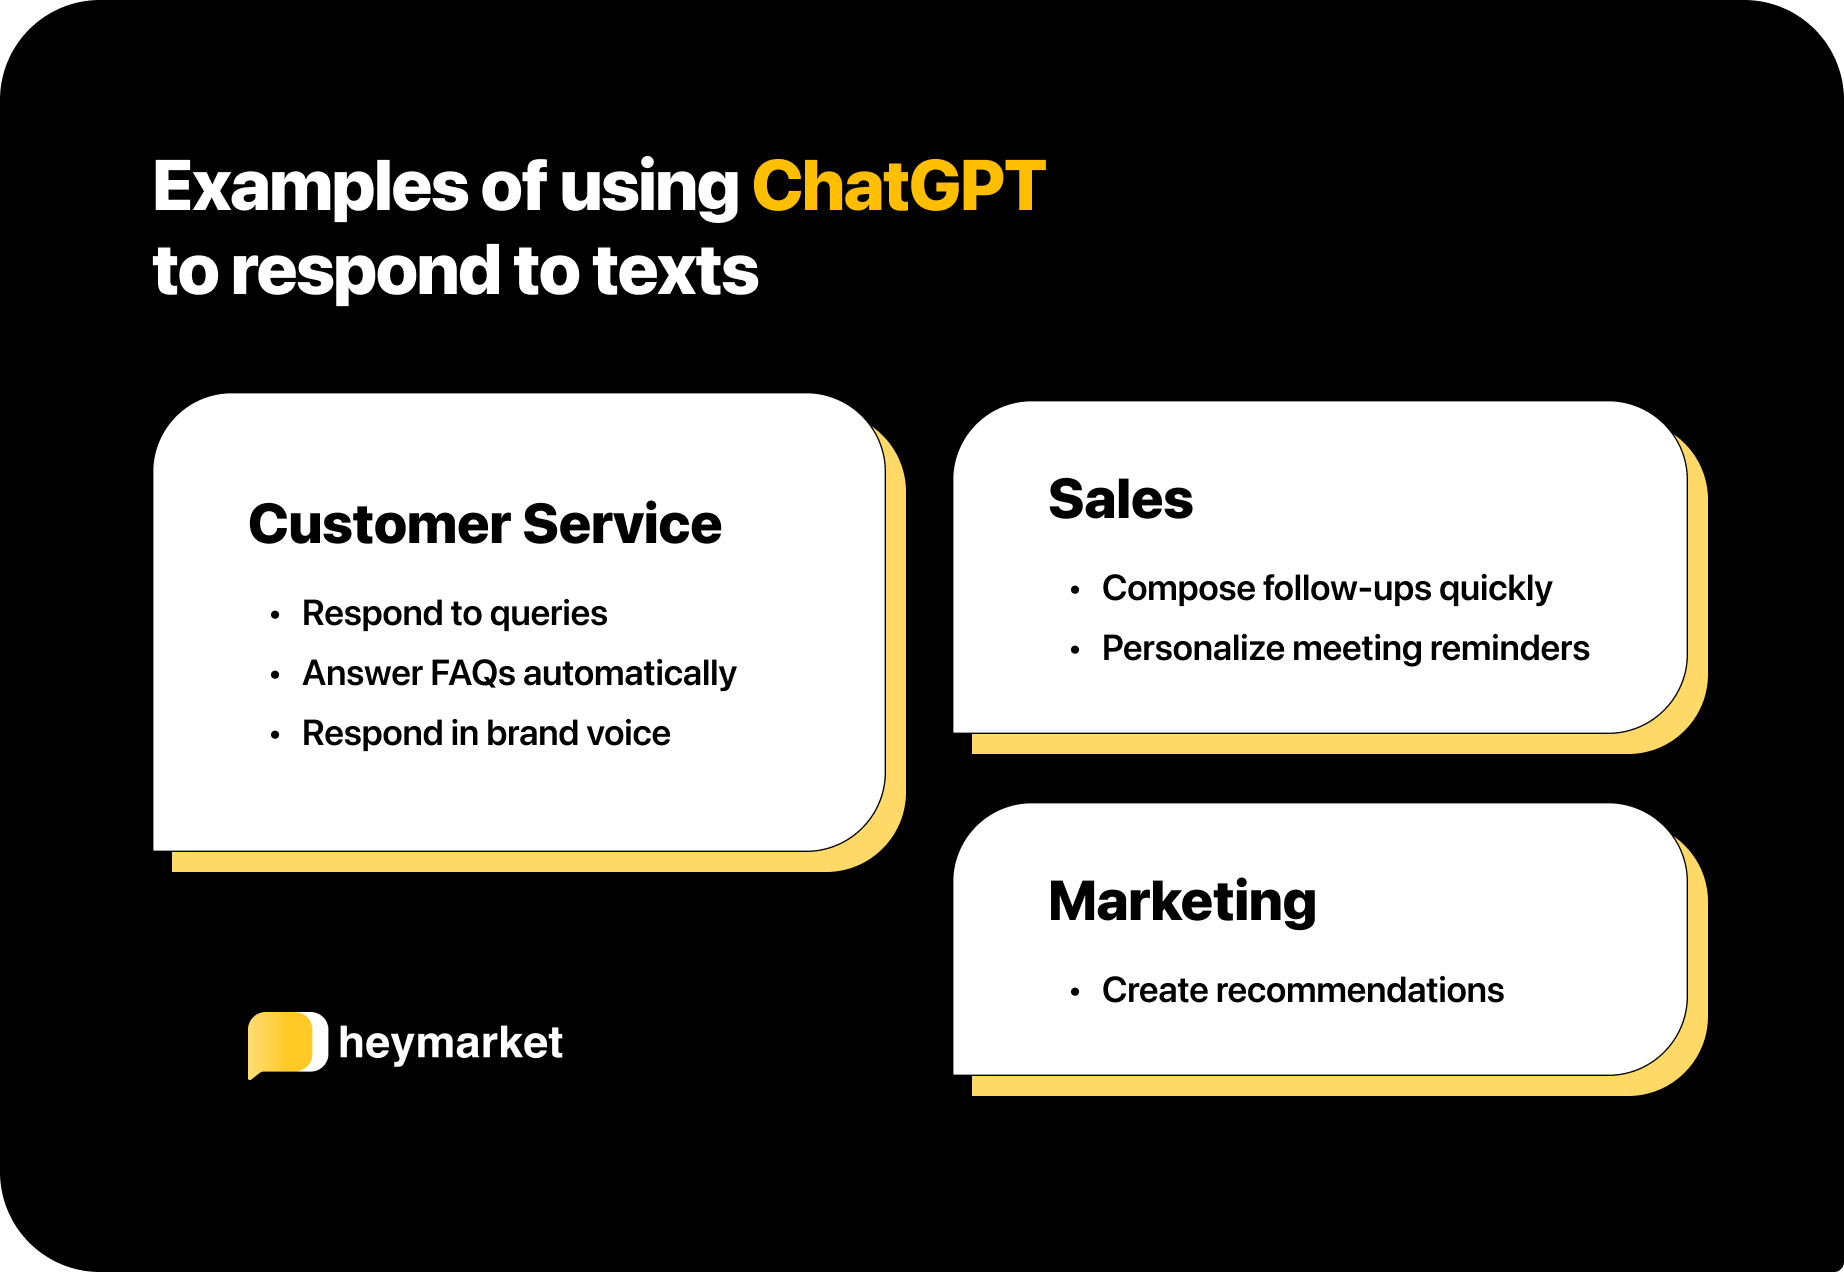 Examples of using ChatGPT to respond to texts for customer service, sales, and marketing.